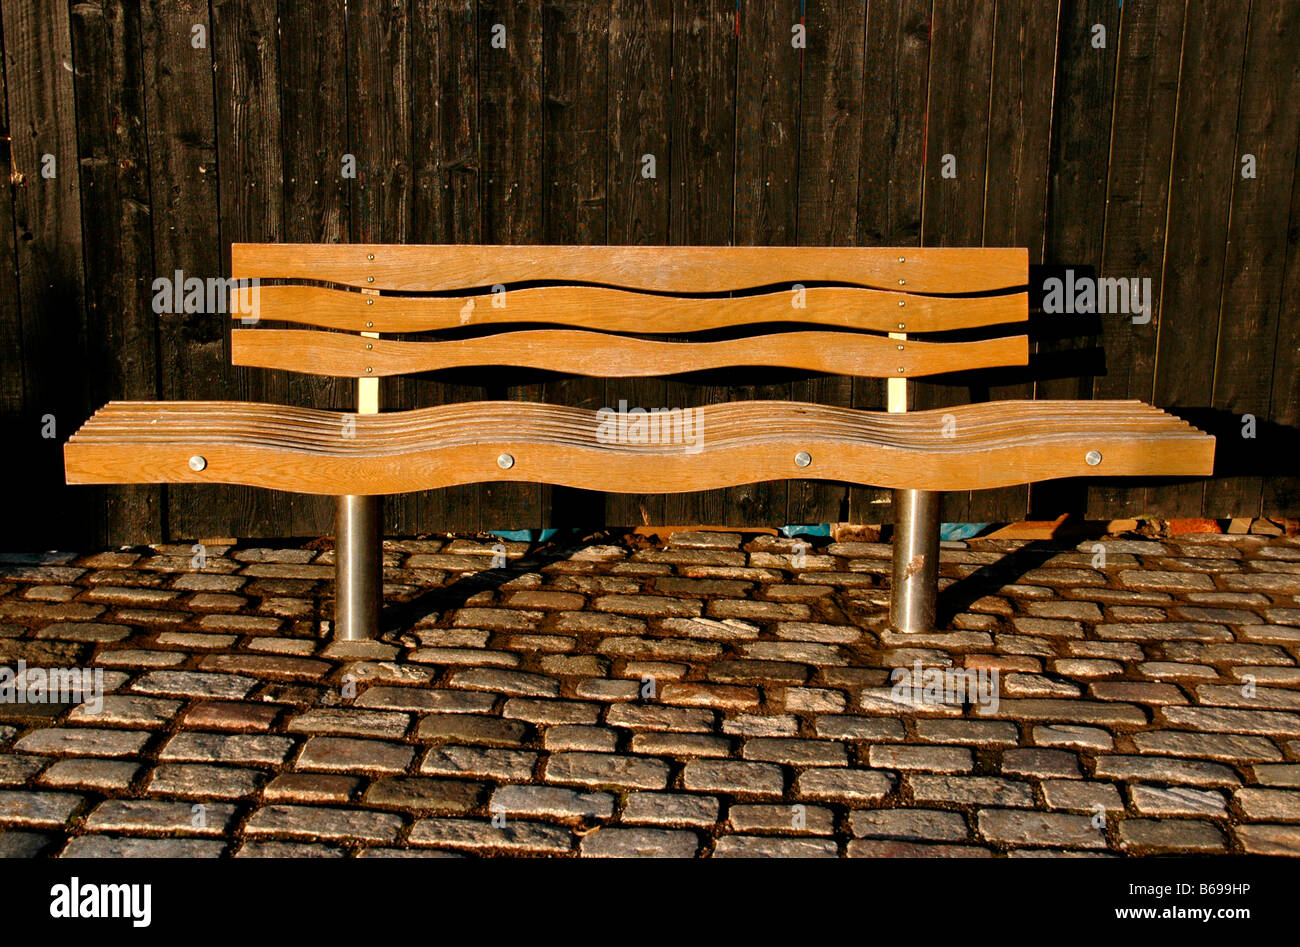 A wooden public bench at a harbour. The wavy shapes of it evoking the sea. Stock Photo